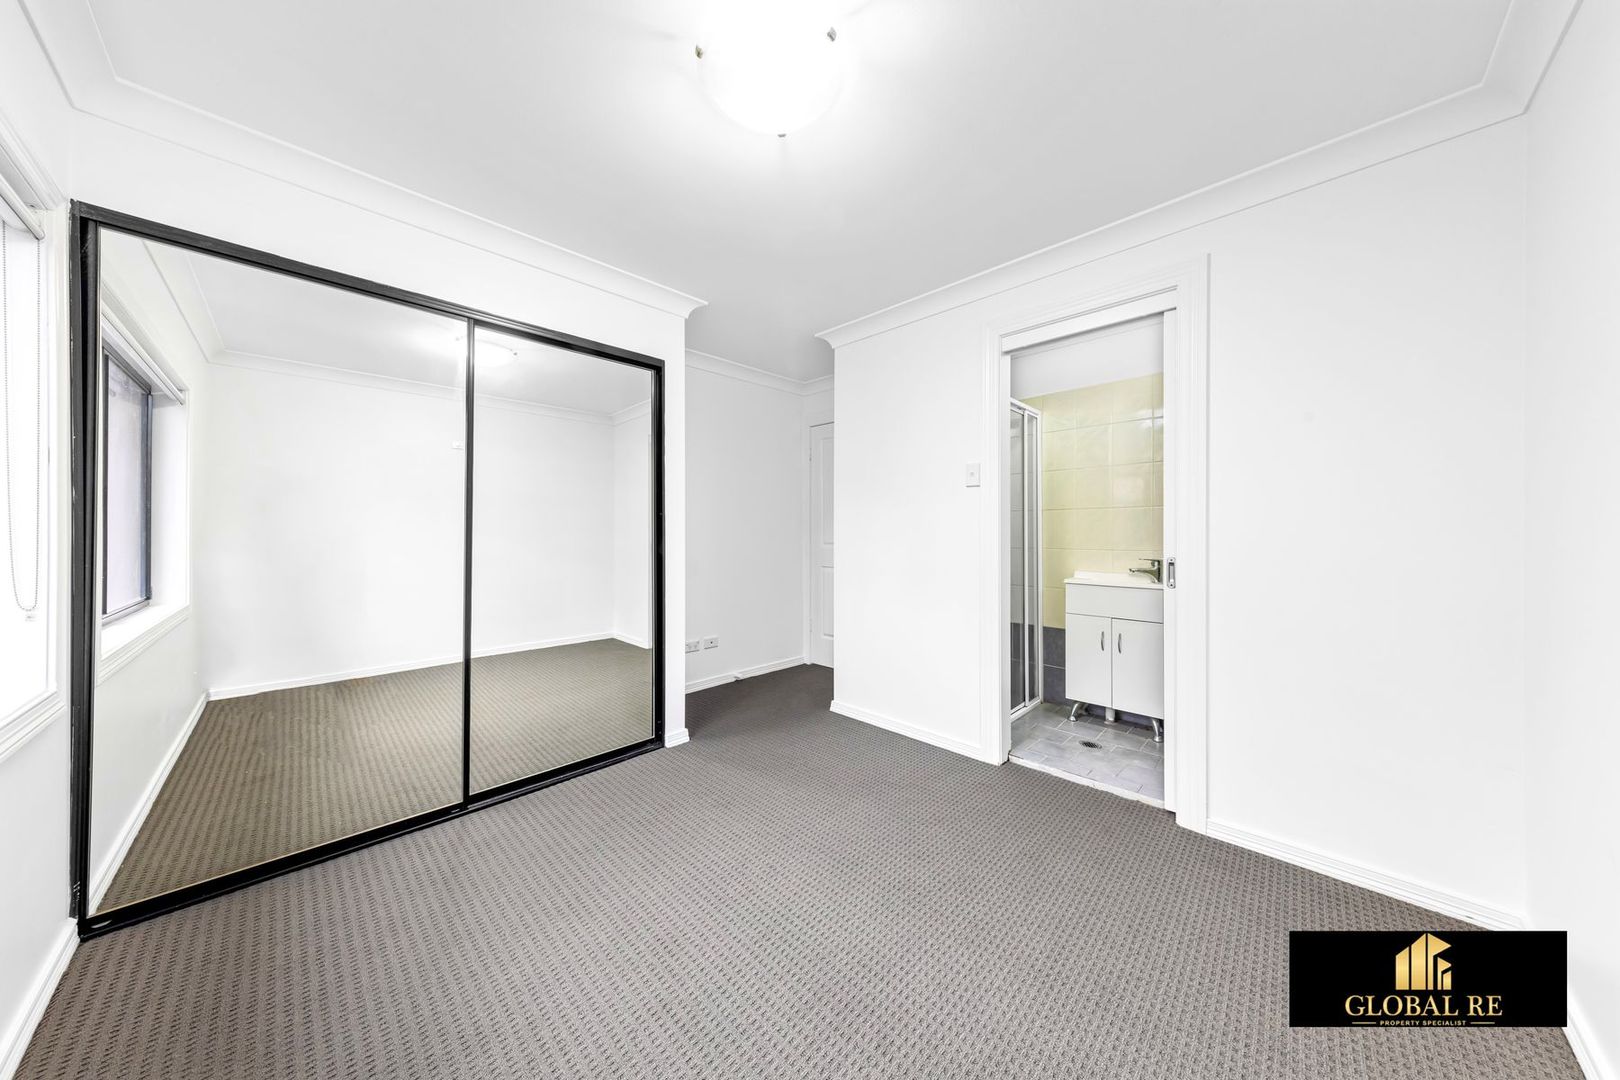 14/105 Bellevue ave, Georges Hall NSW 2198, Image 2